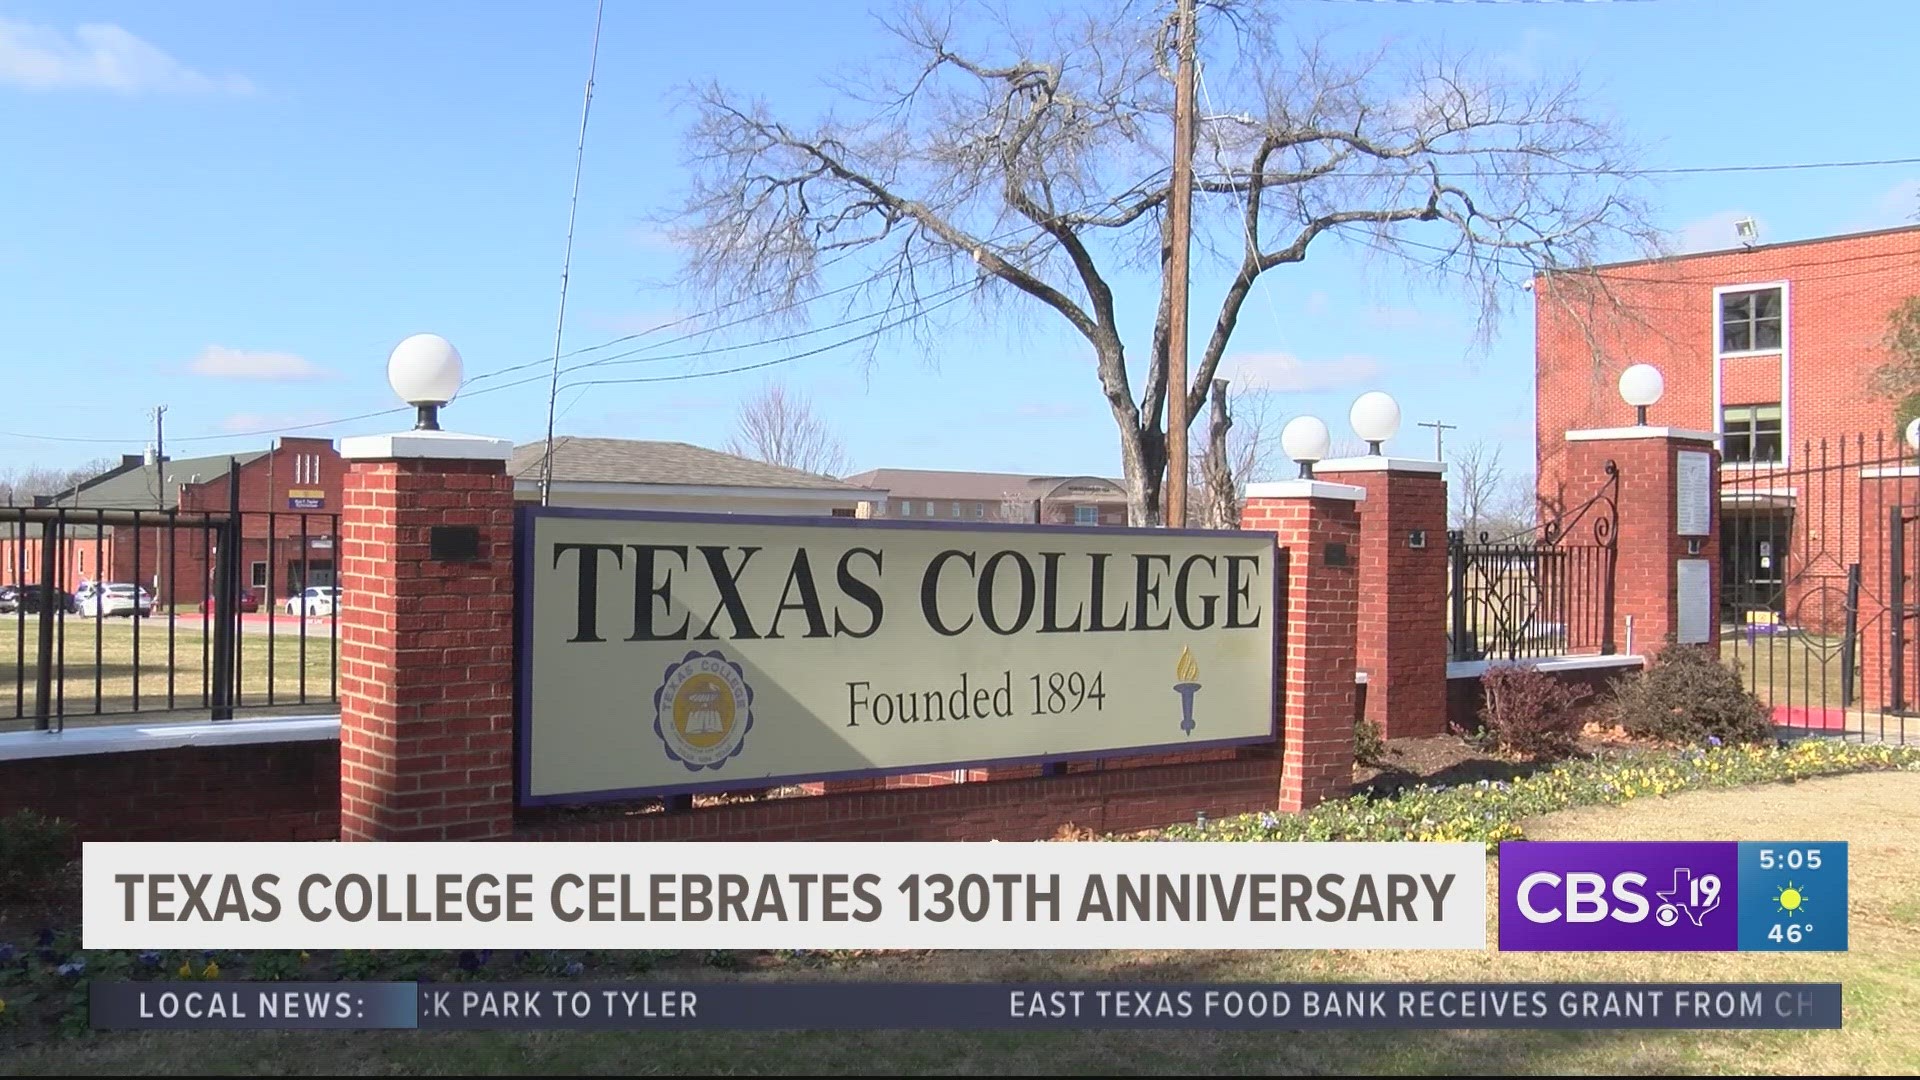 Founded in January 9, 1894, this college is the oldest institution of higher learning in Tyler.